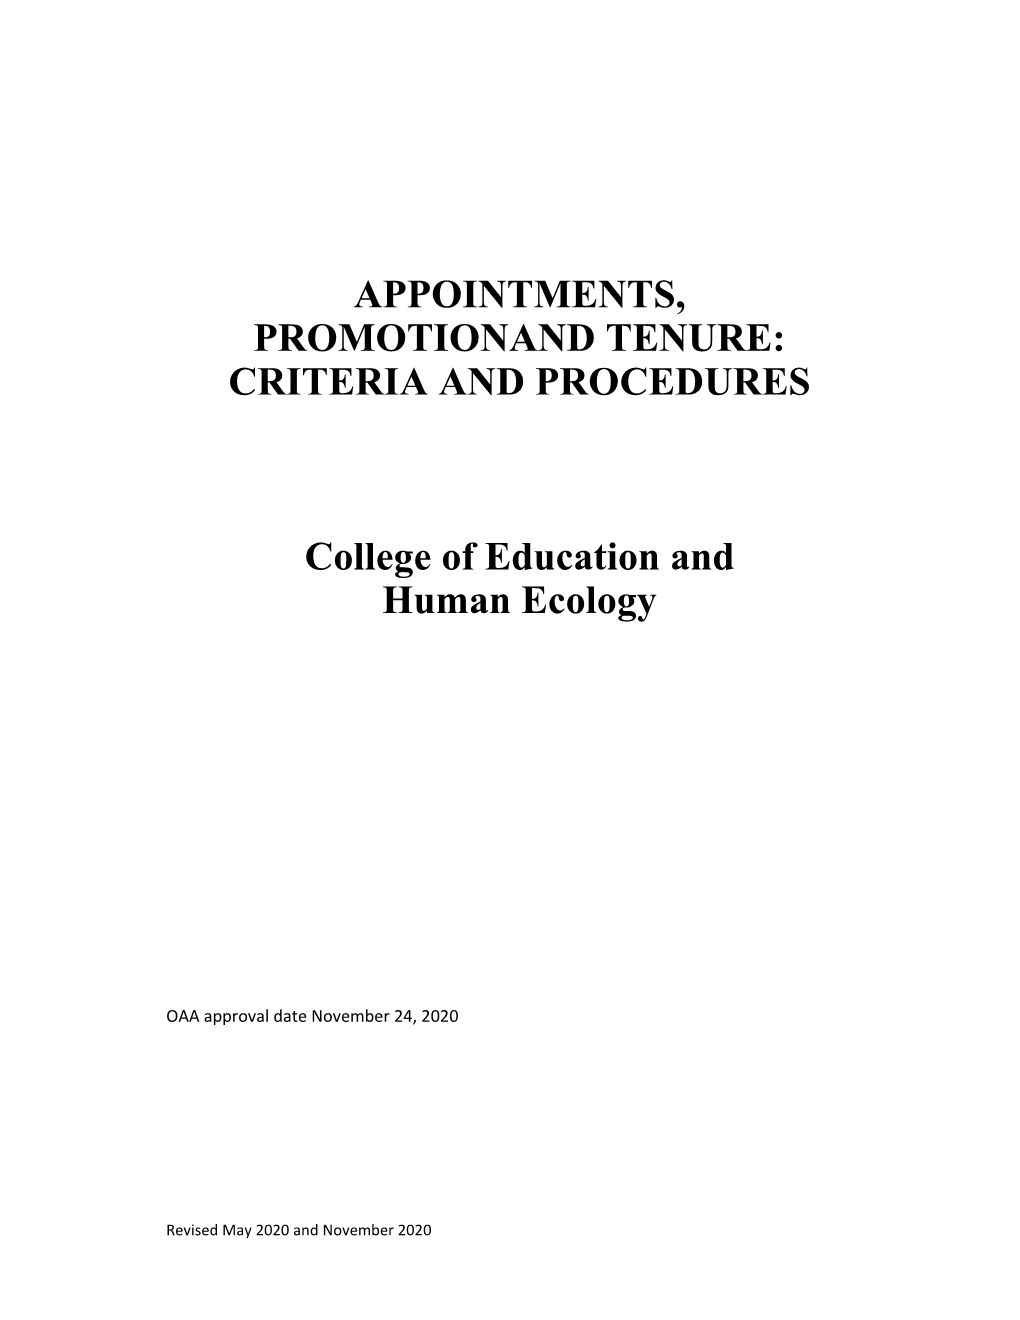 APPOINTMENTS, PROMOTIONAND TENURE: CRITERIA and PROCEDURES College of Education and Human Ecology